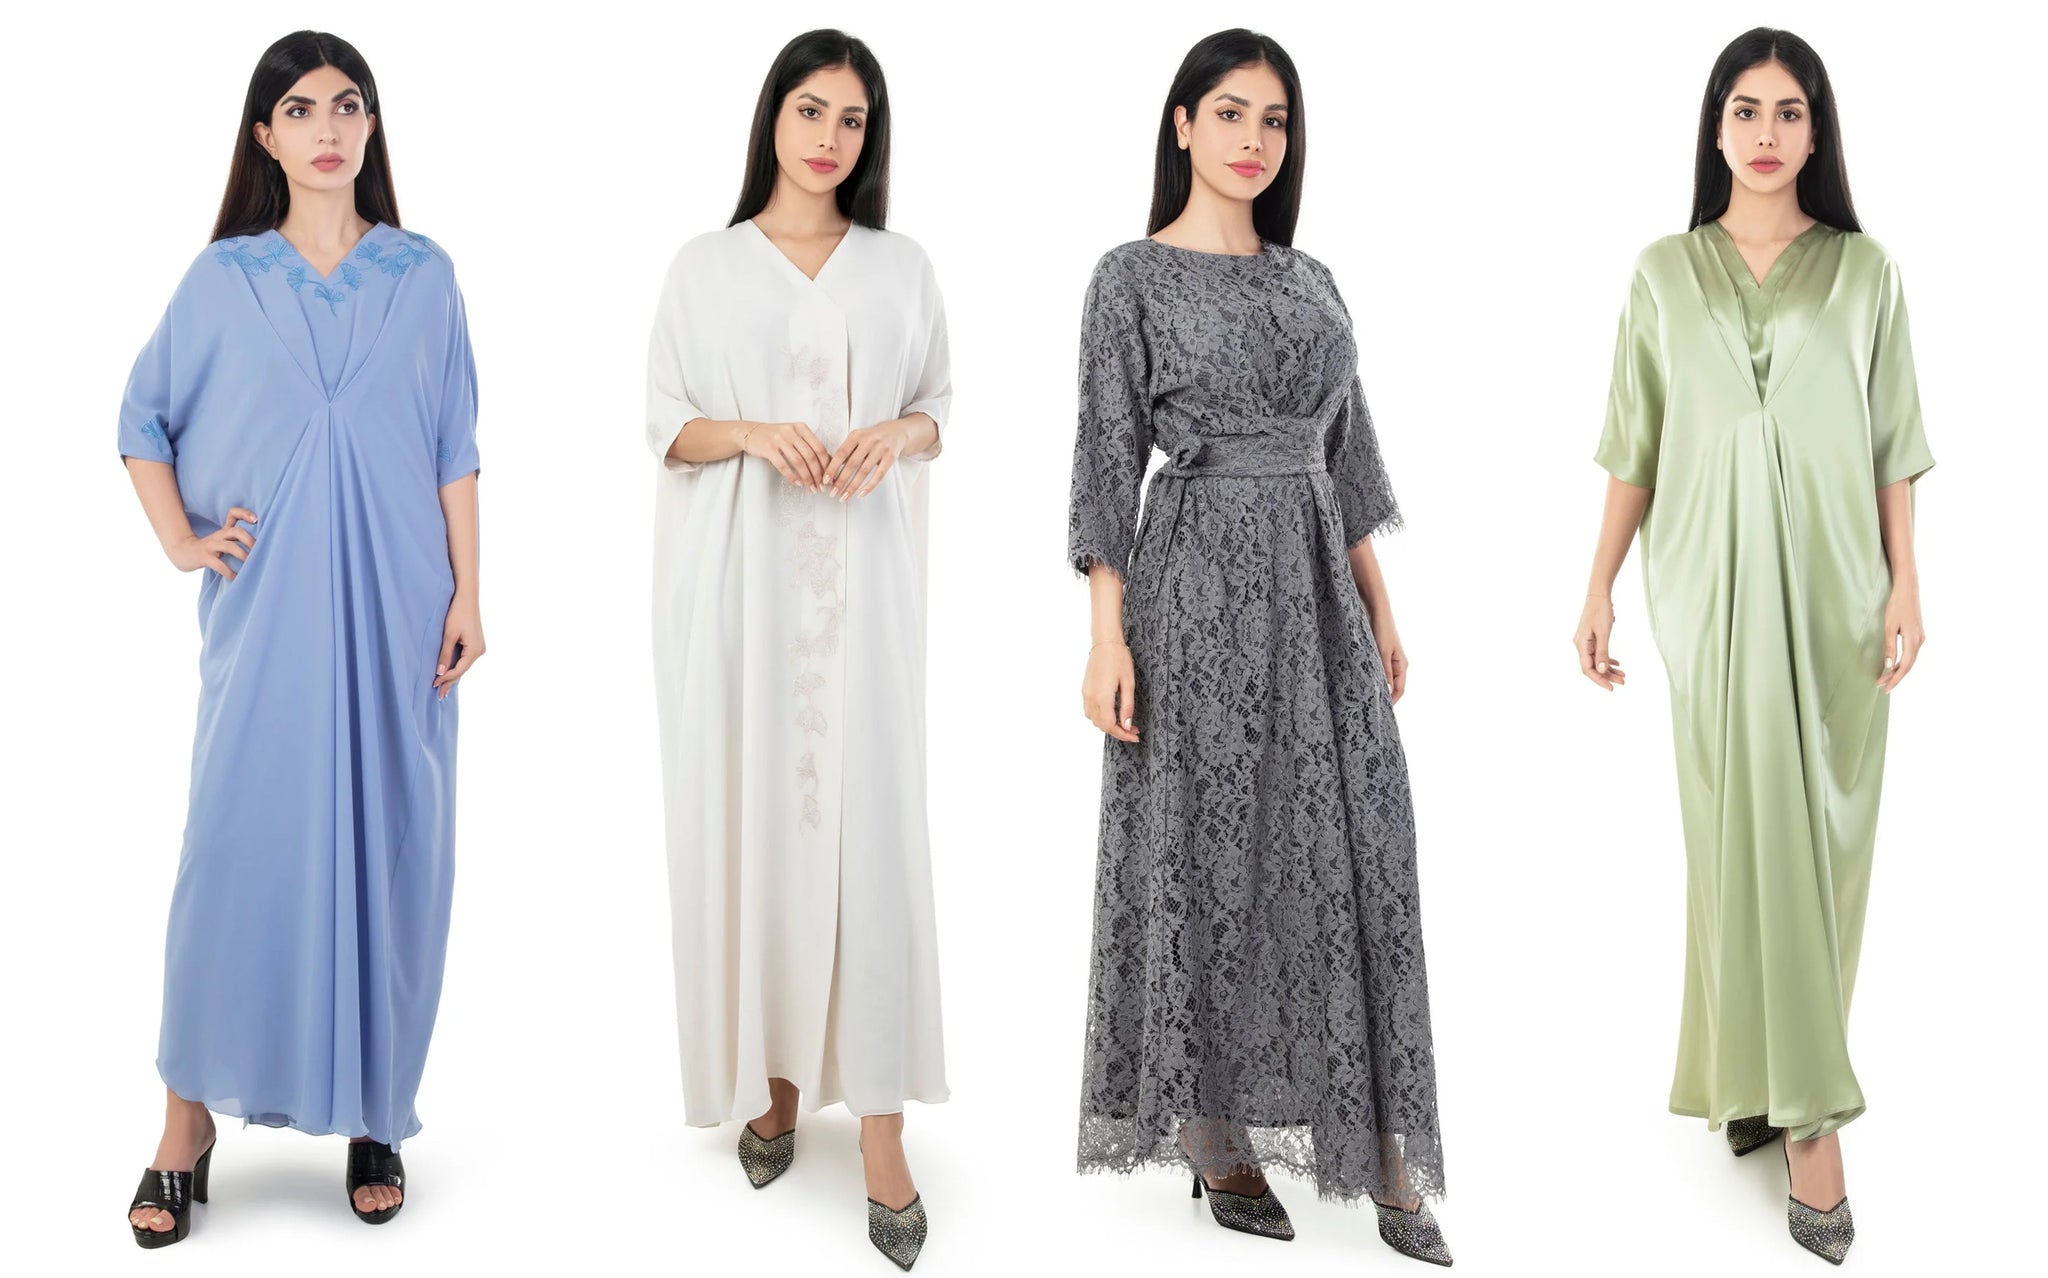 What to wear beneath your Designer Abayas?